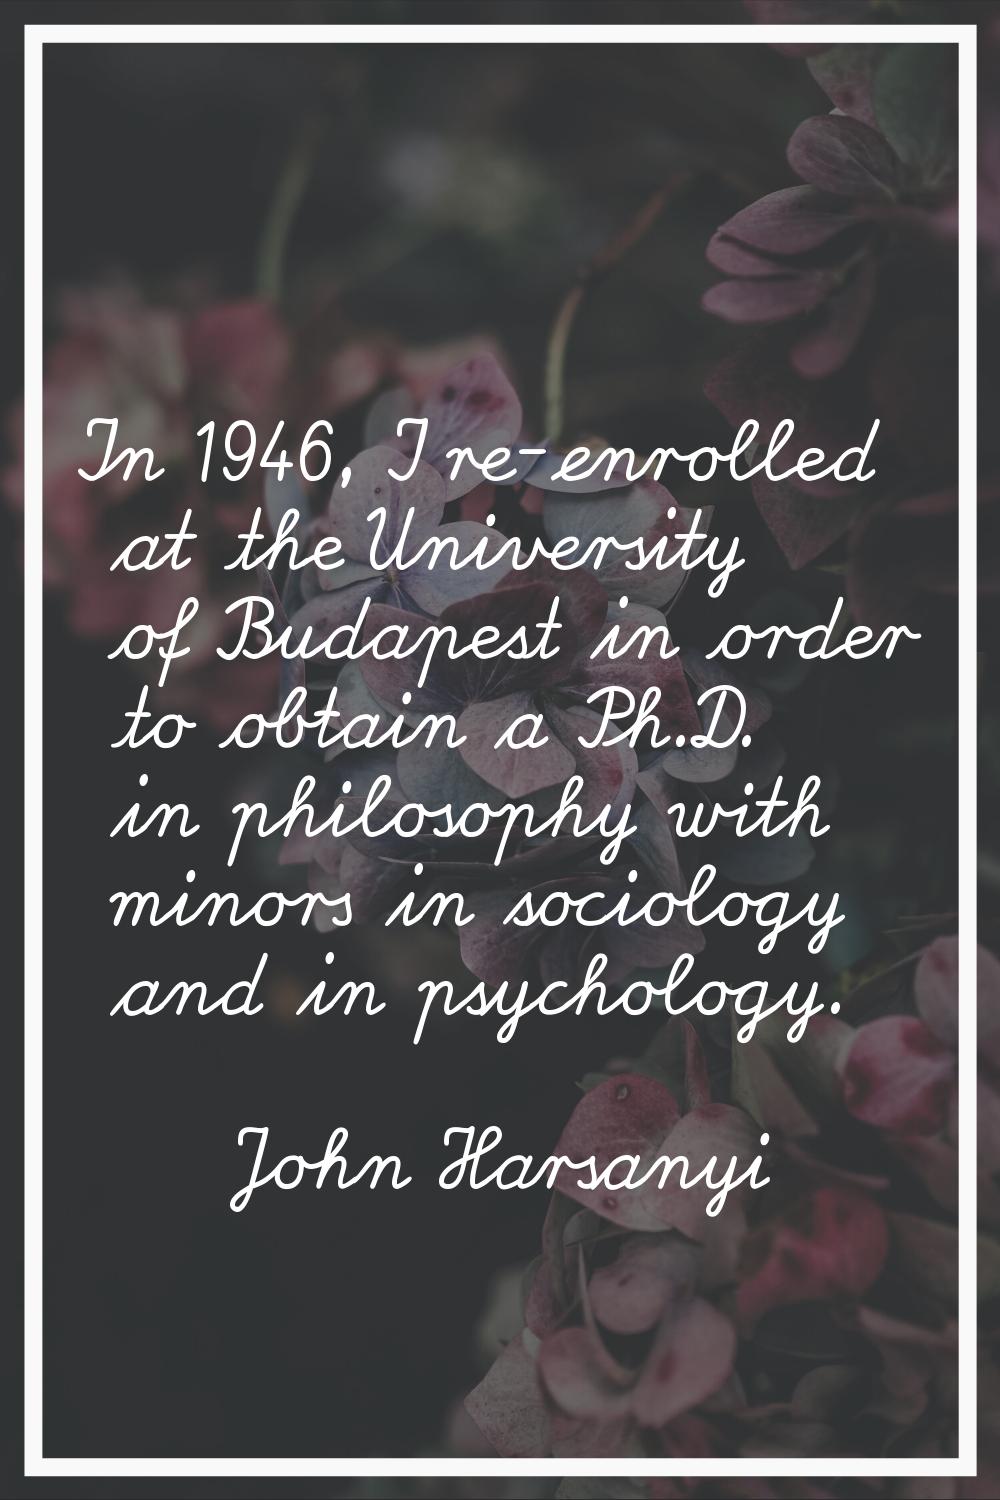 In 1946, I re-enrolled at the University of Budapest in order to obtain a Ph.D. in philosophy with 